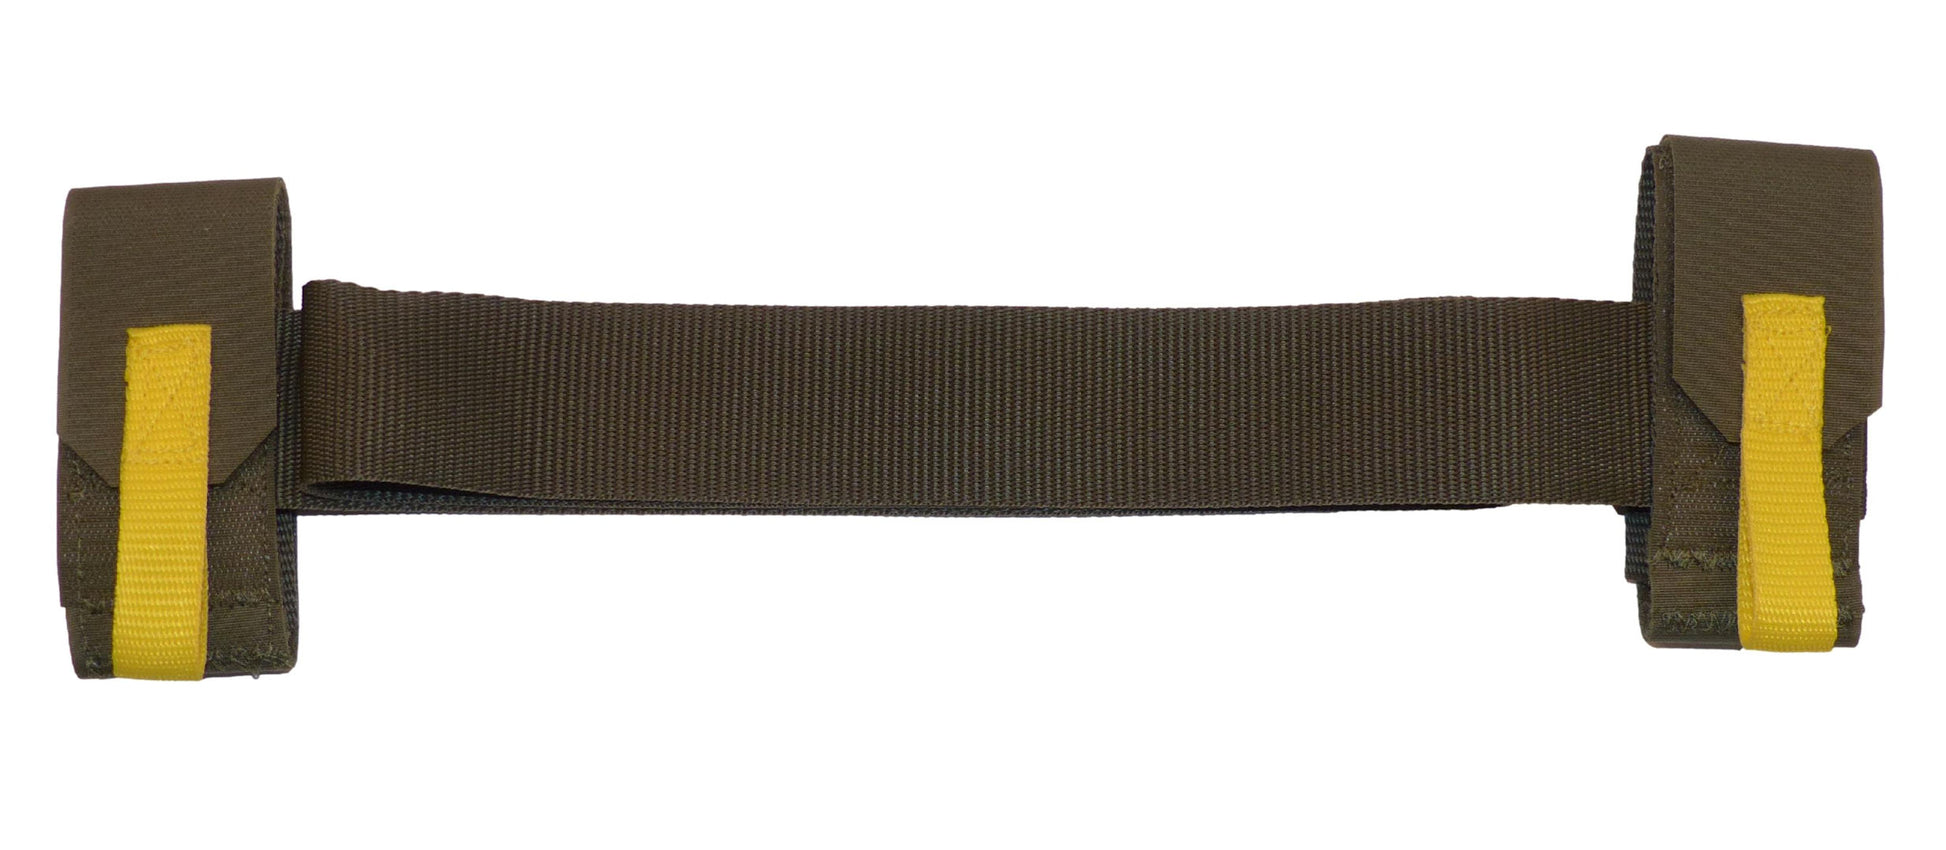 Benristraps Ski and Pole Carry Strap in green